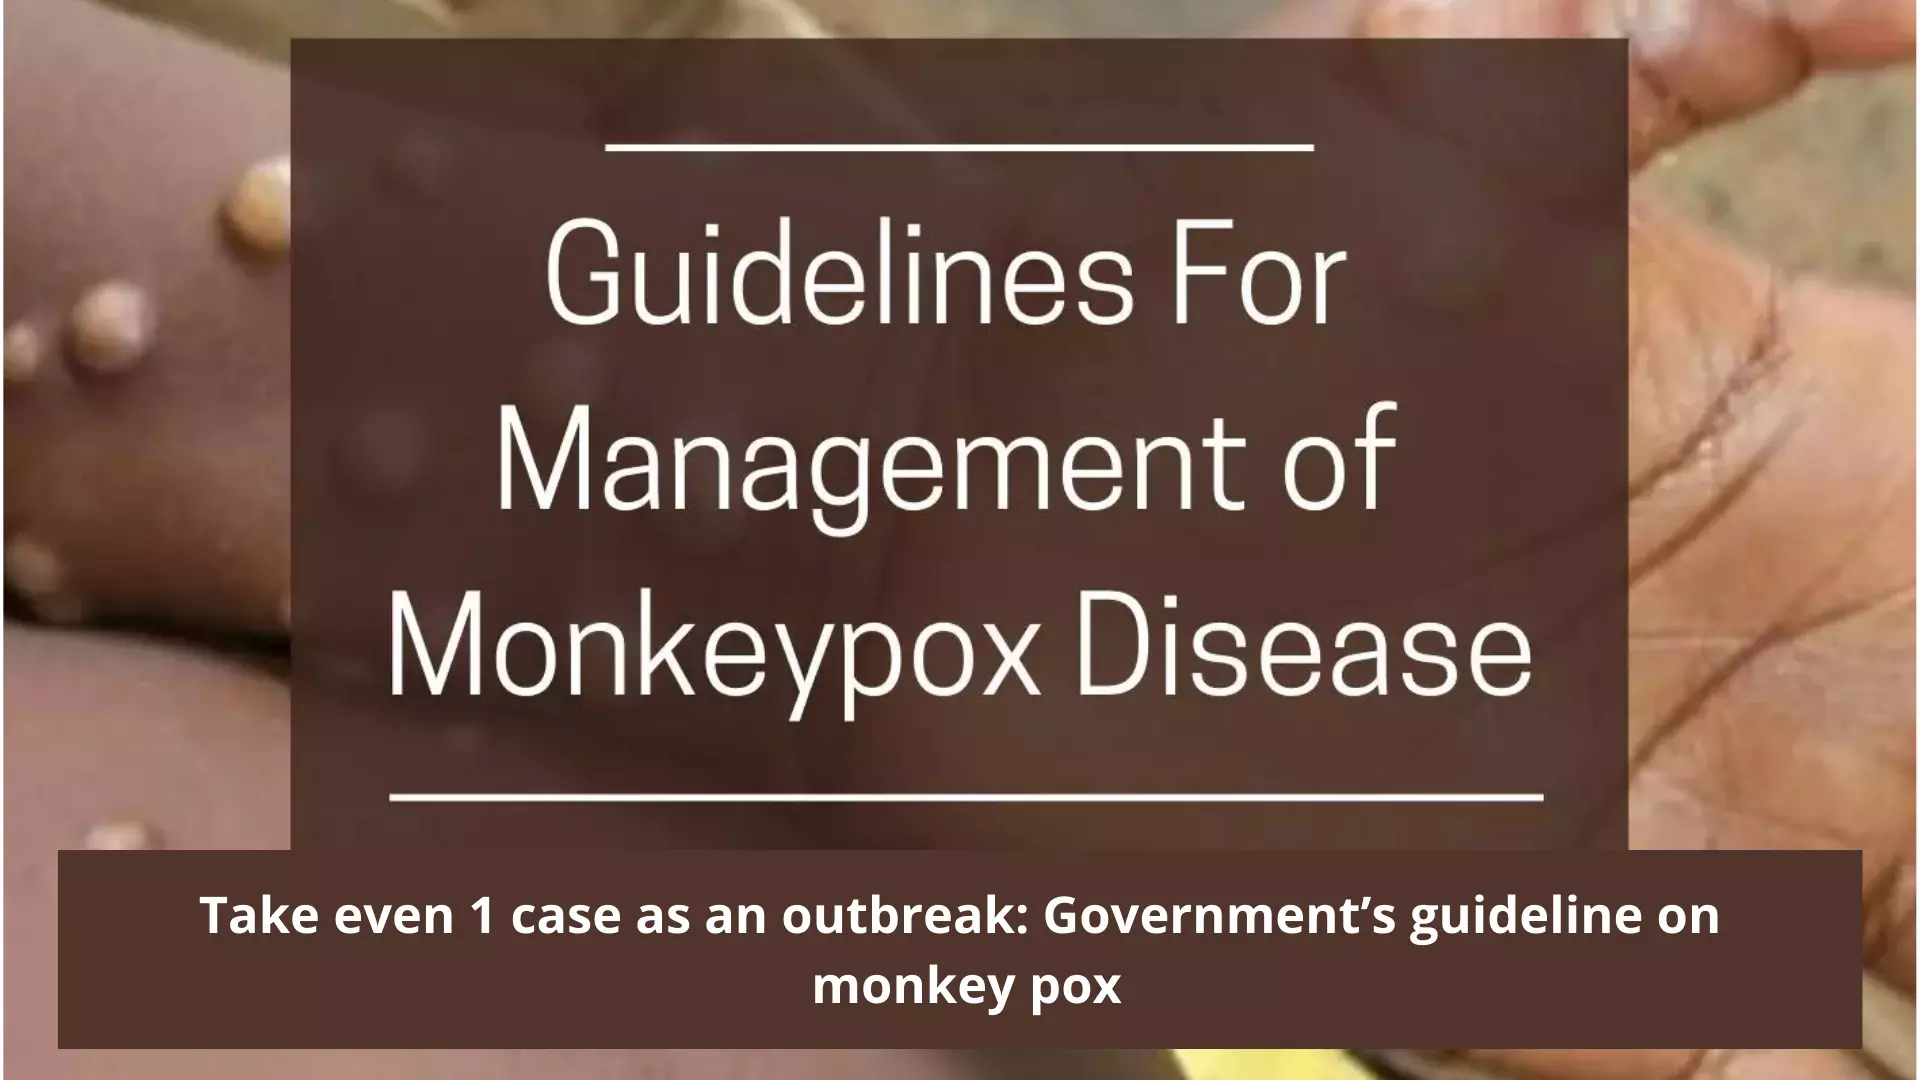 Ministry of Health issues guidelines on management of Monkeypox